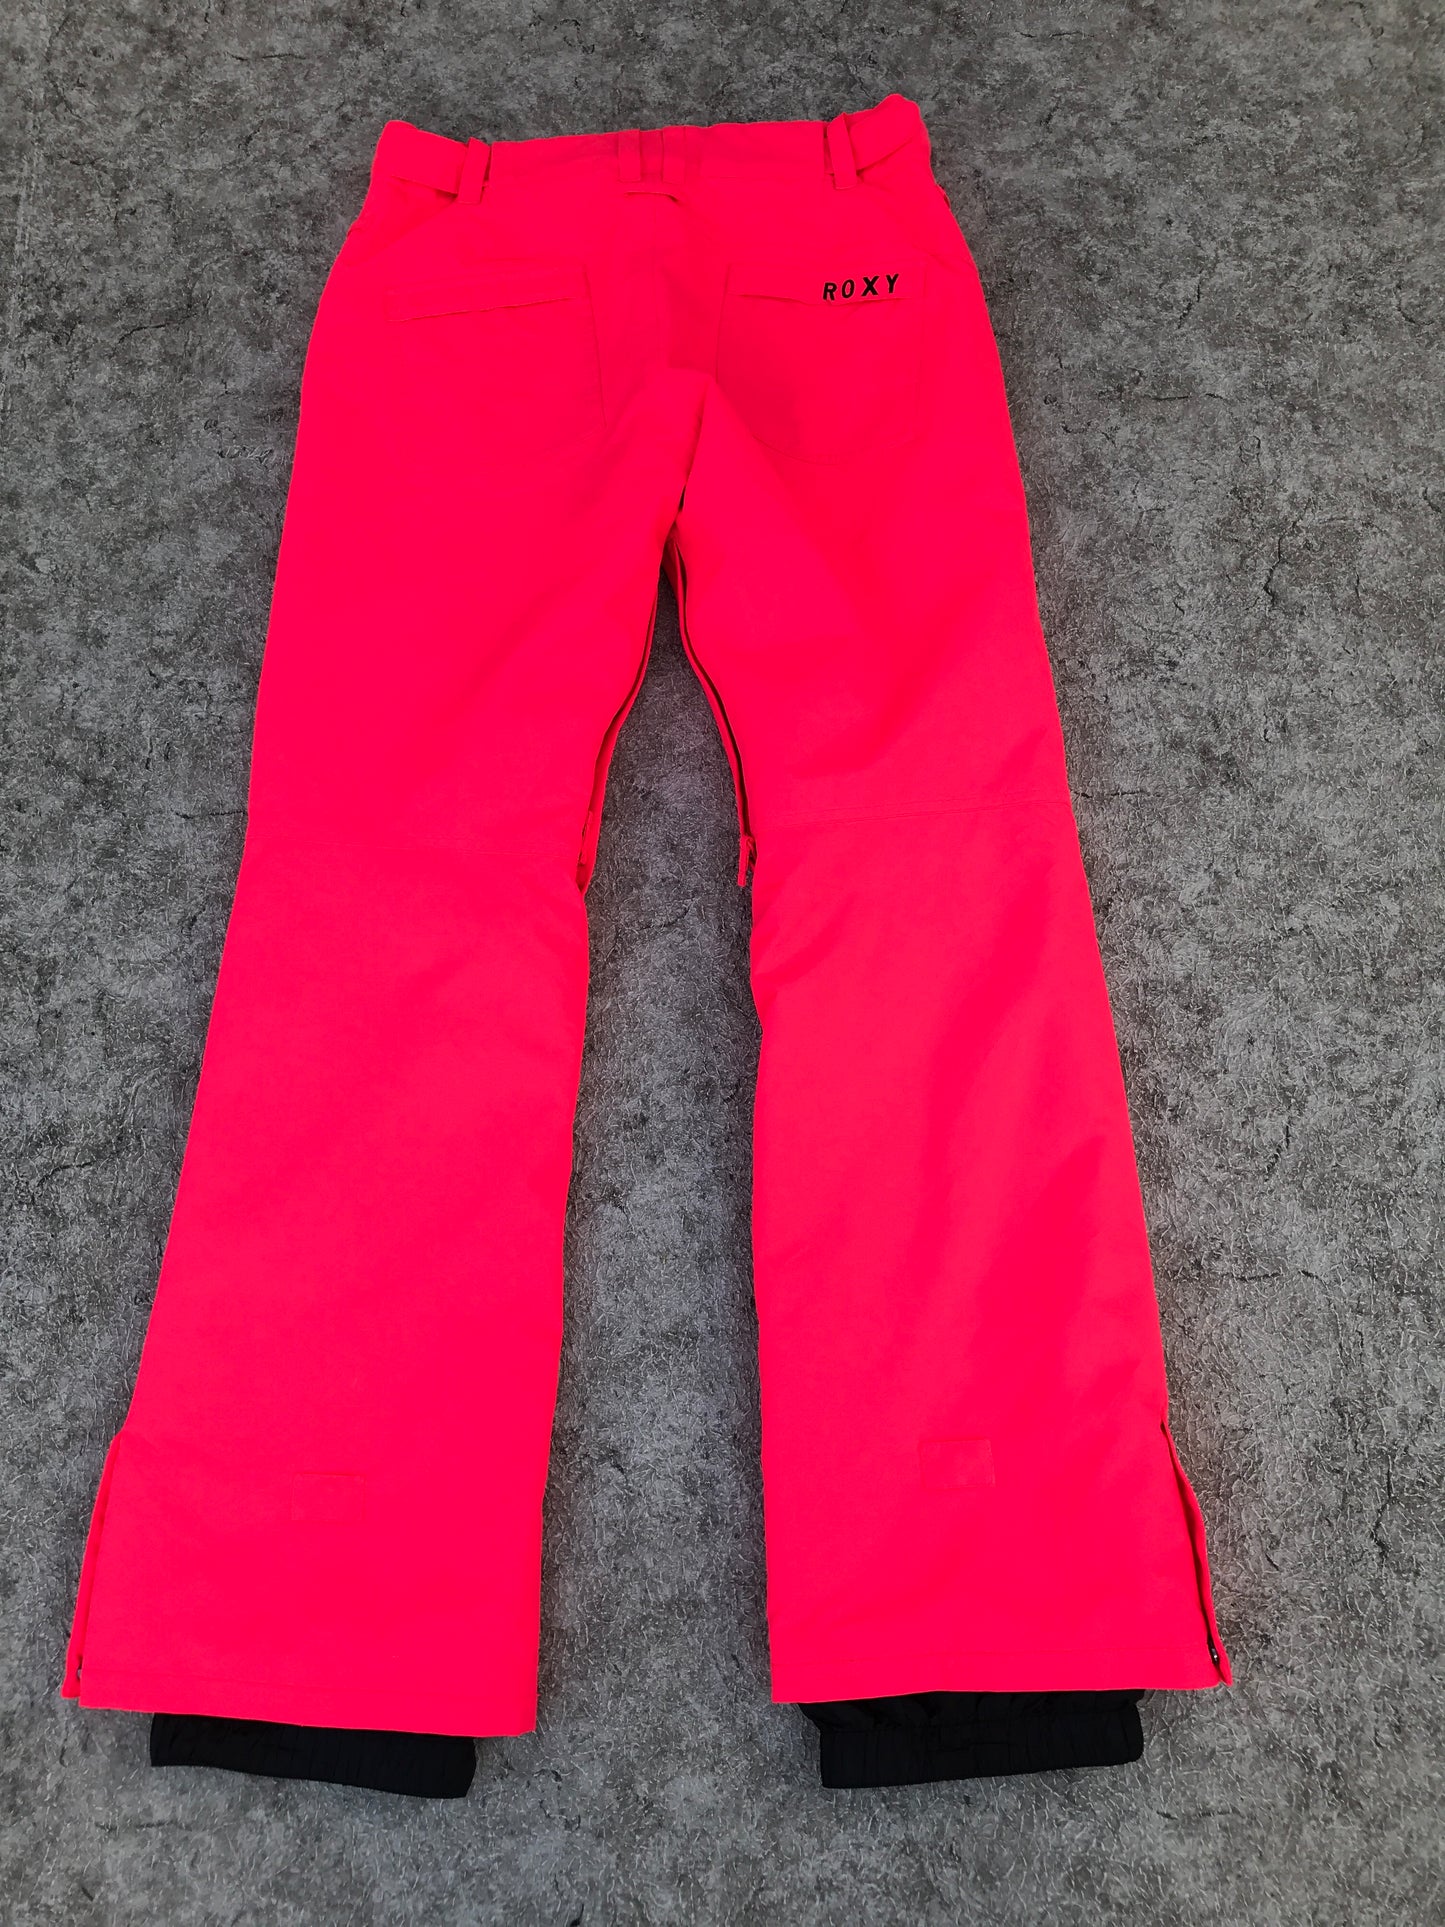 Snow Pants Ladies Women's Size Medium Roxy Hot Pink Outstanding Quality Like New